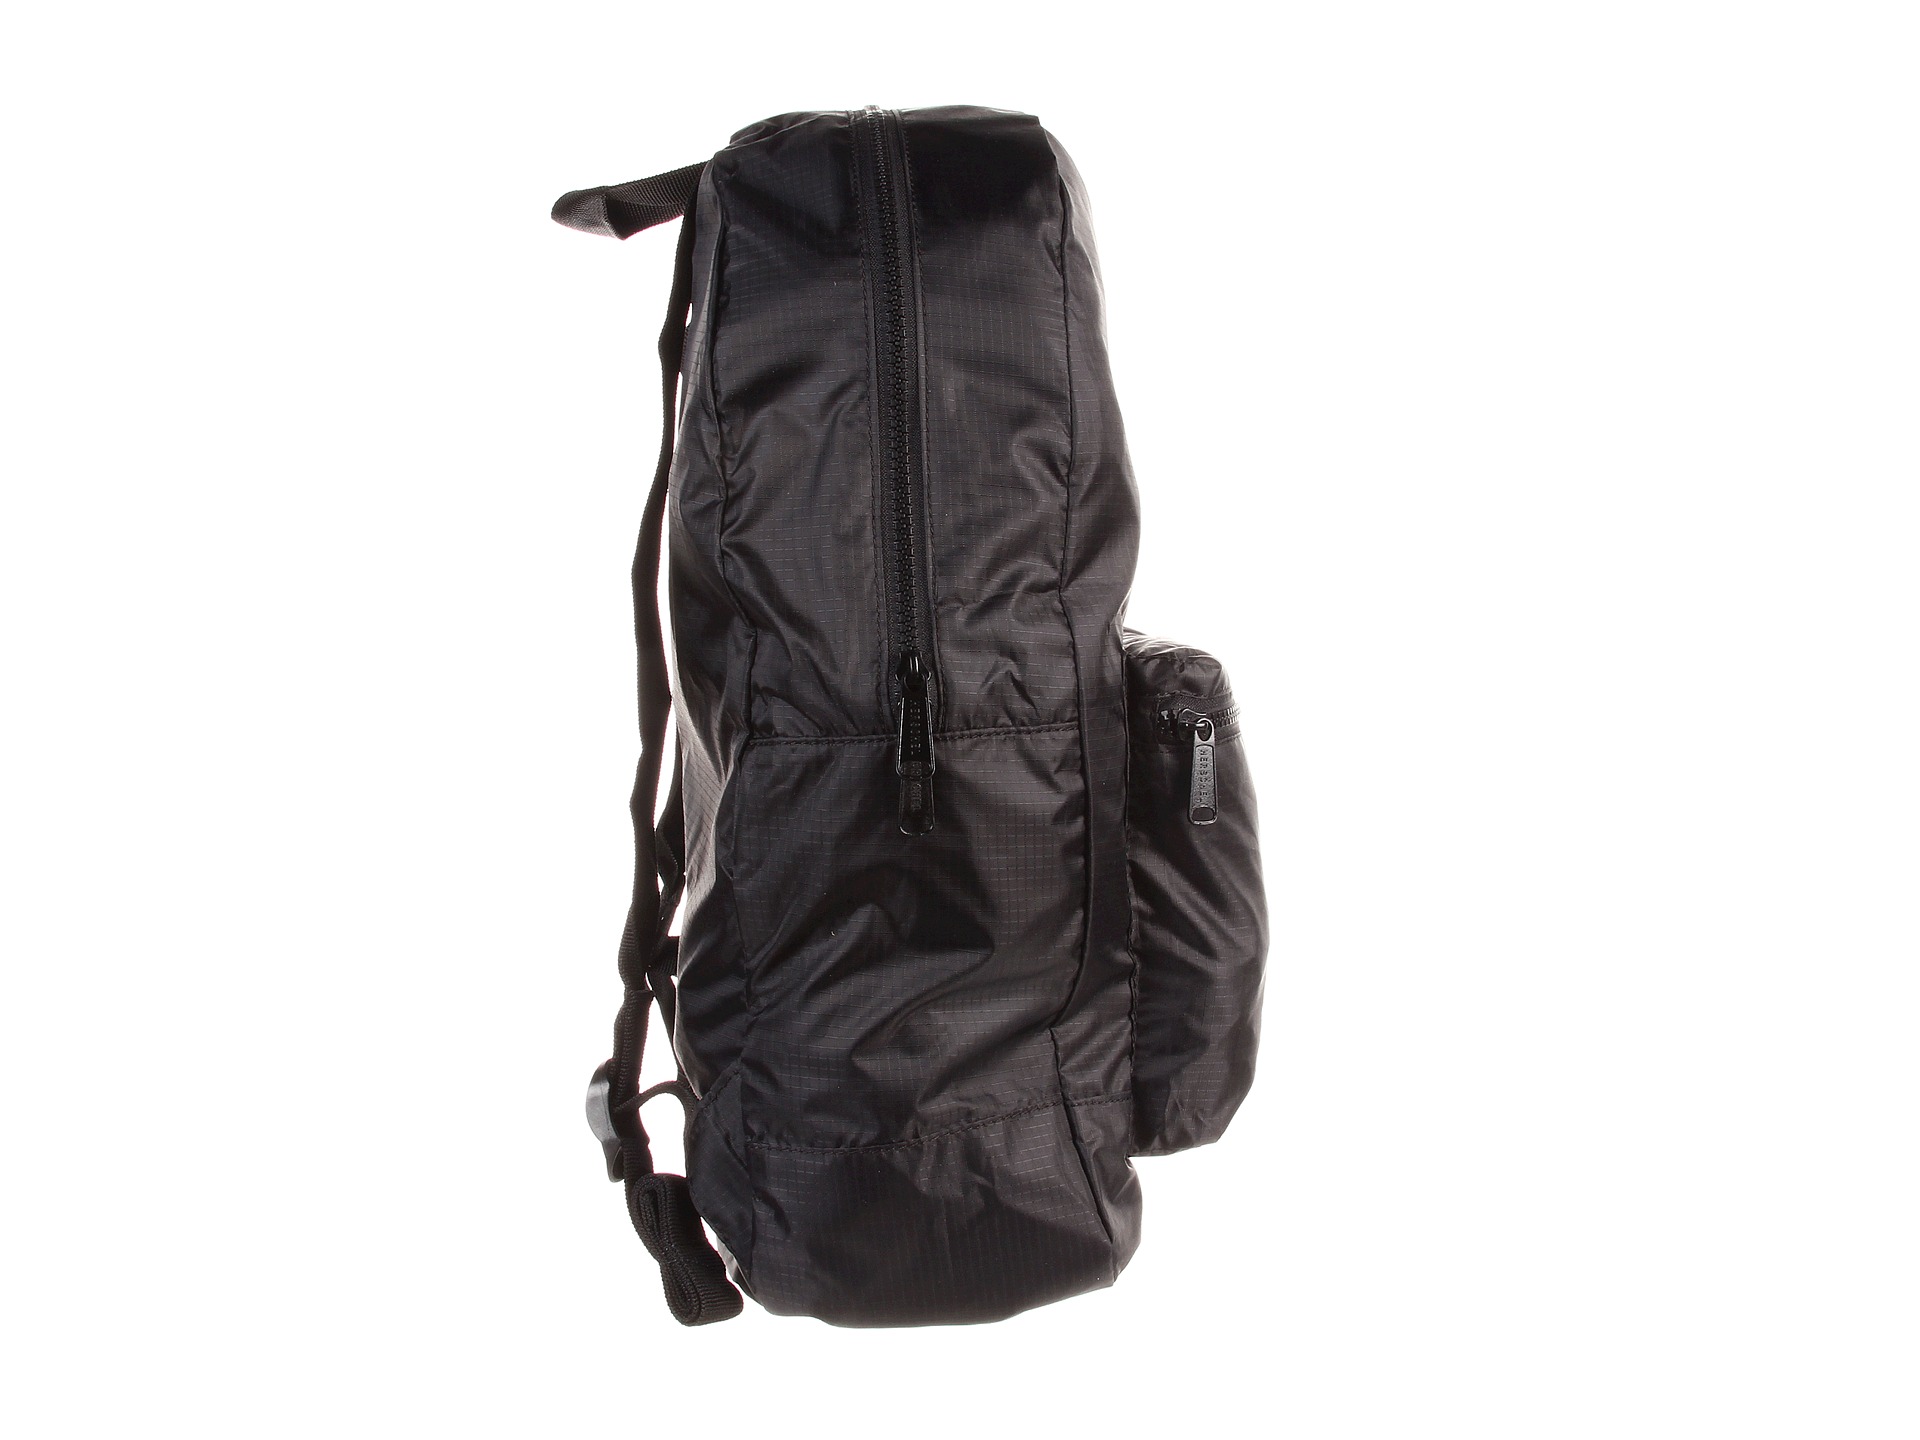 Herschel Supply Co. Packable Daypack Black - Zappos.com Free Shipping ...